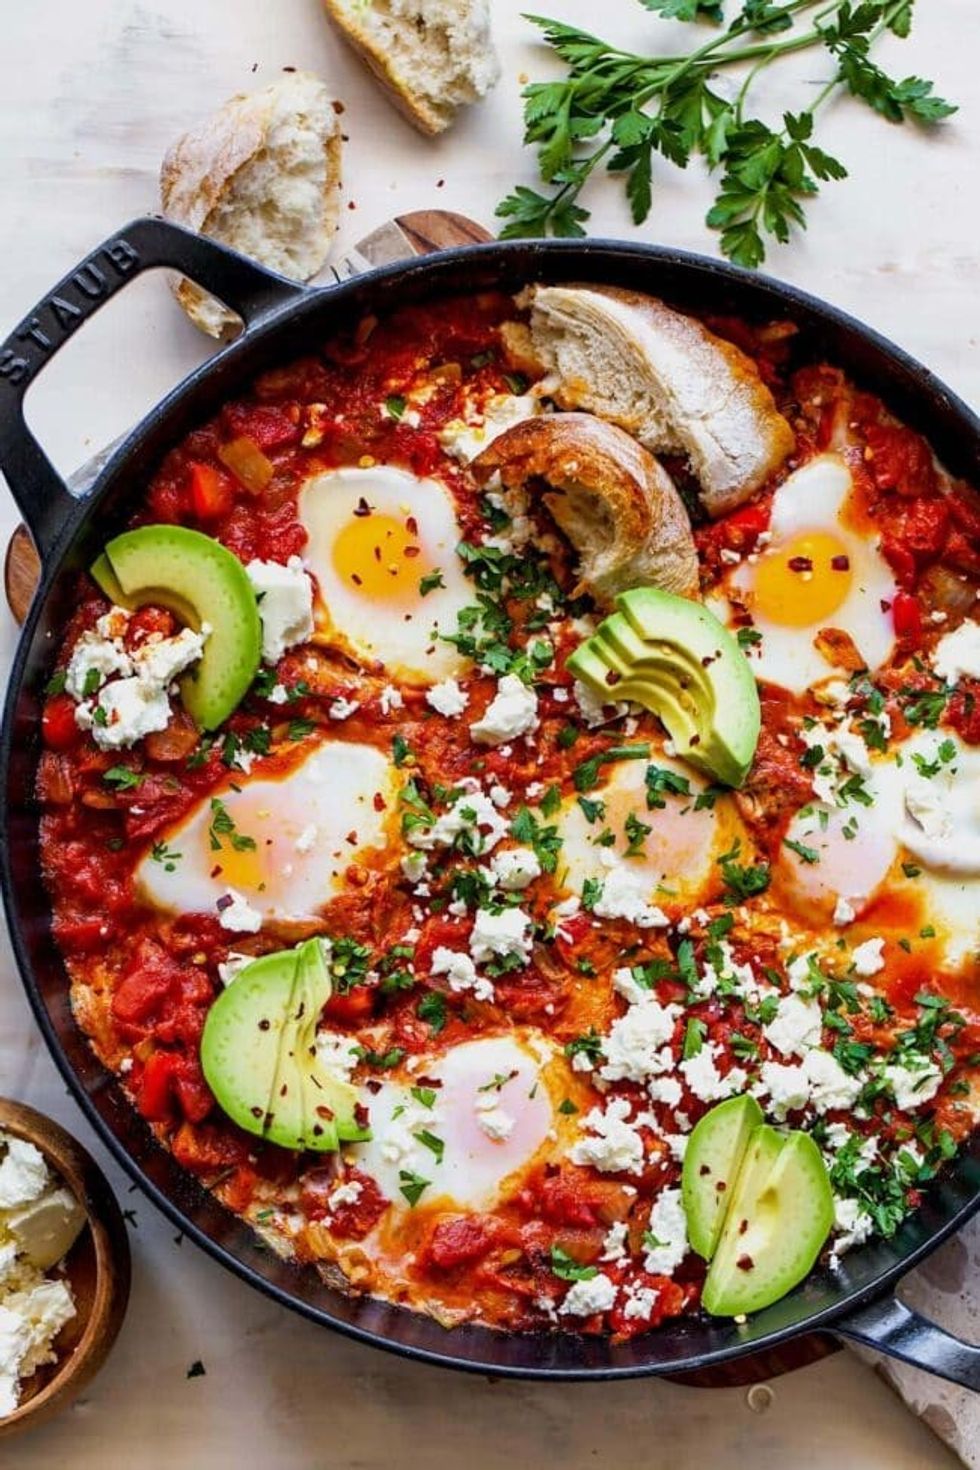 14 Low-Calorie Breakfast Recipes For A Happy Morning - Brit + Co